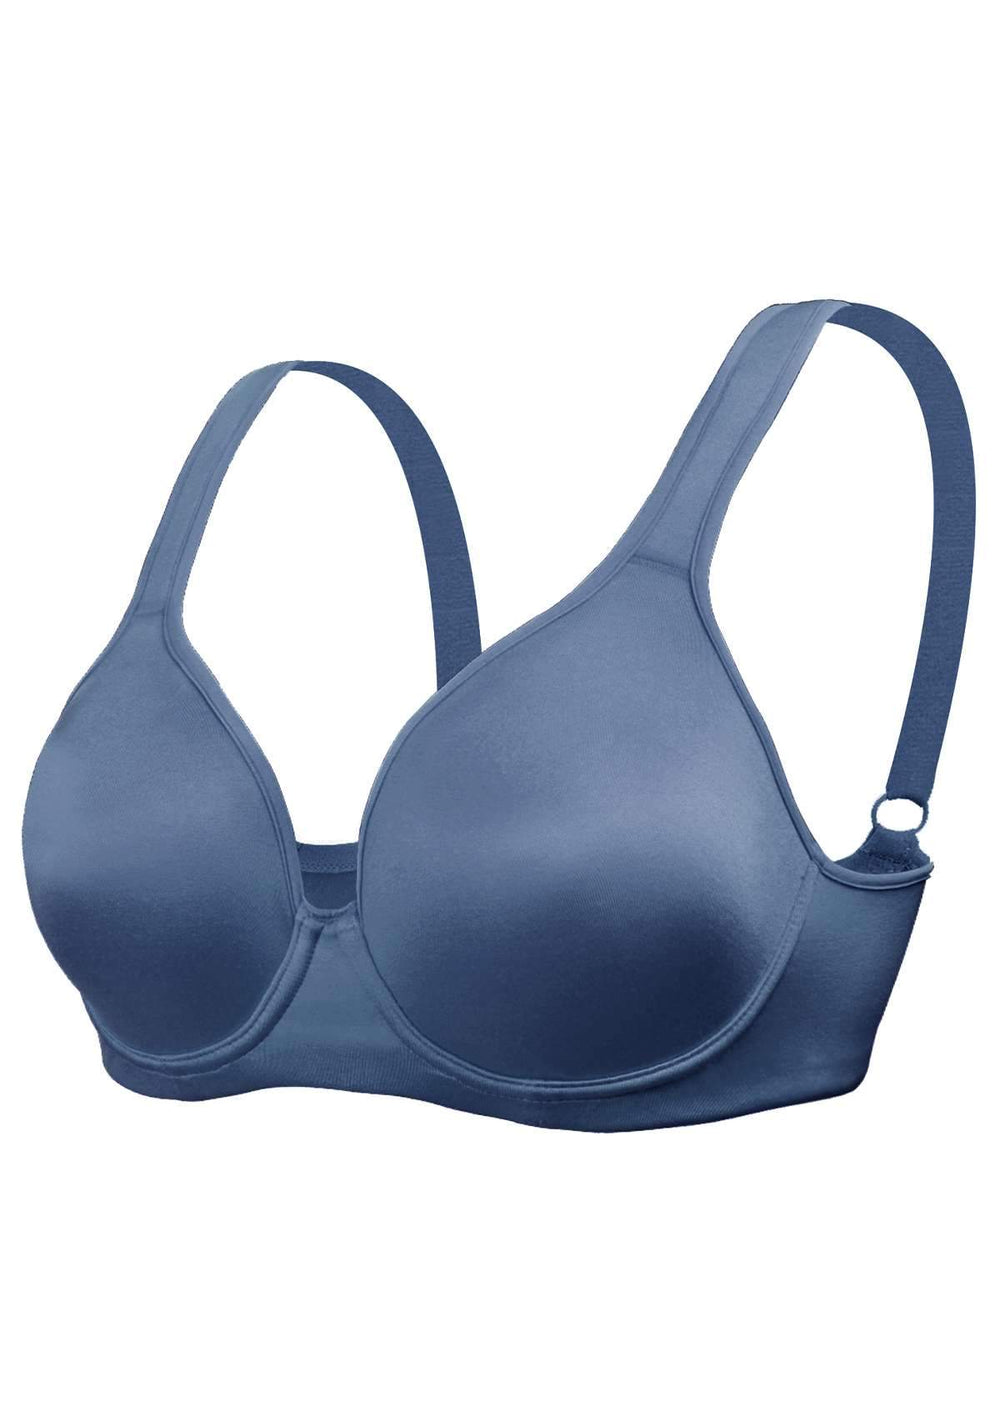 High Standards Molded Underwire Bra Provincial Blue 36D